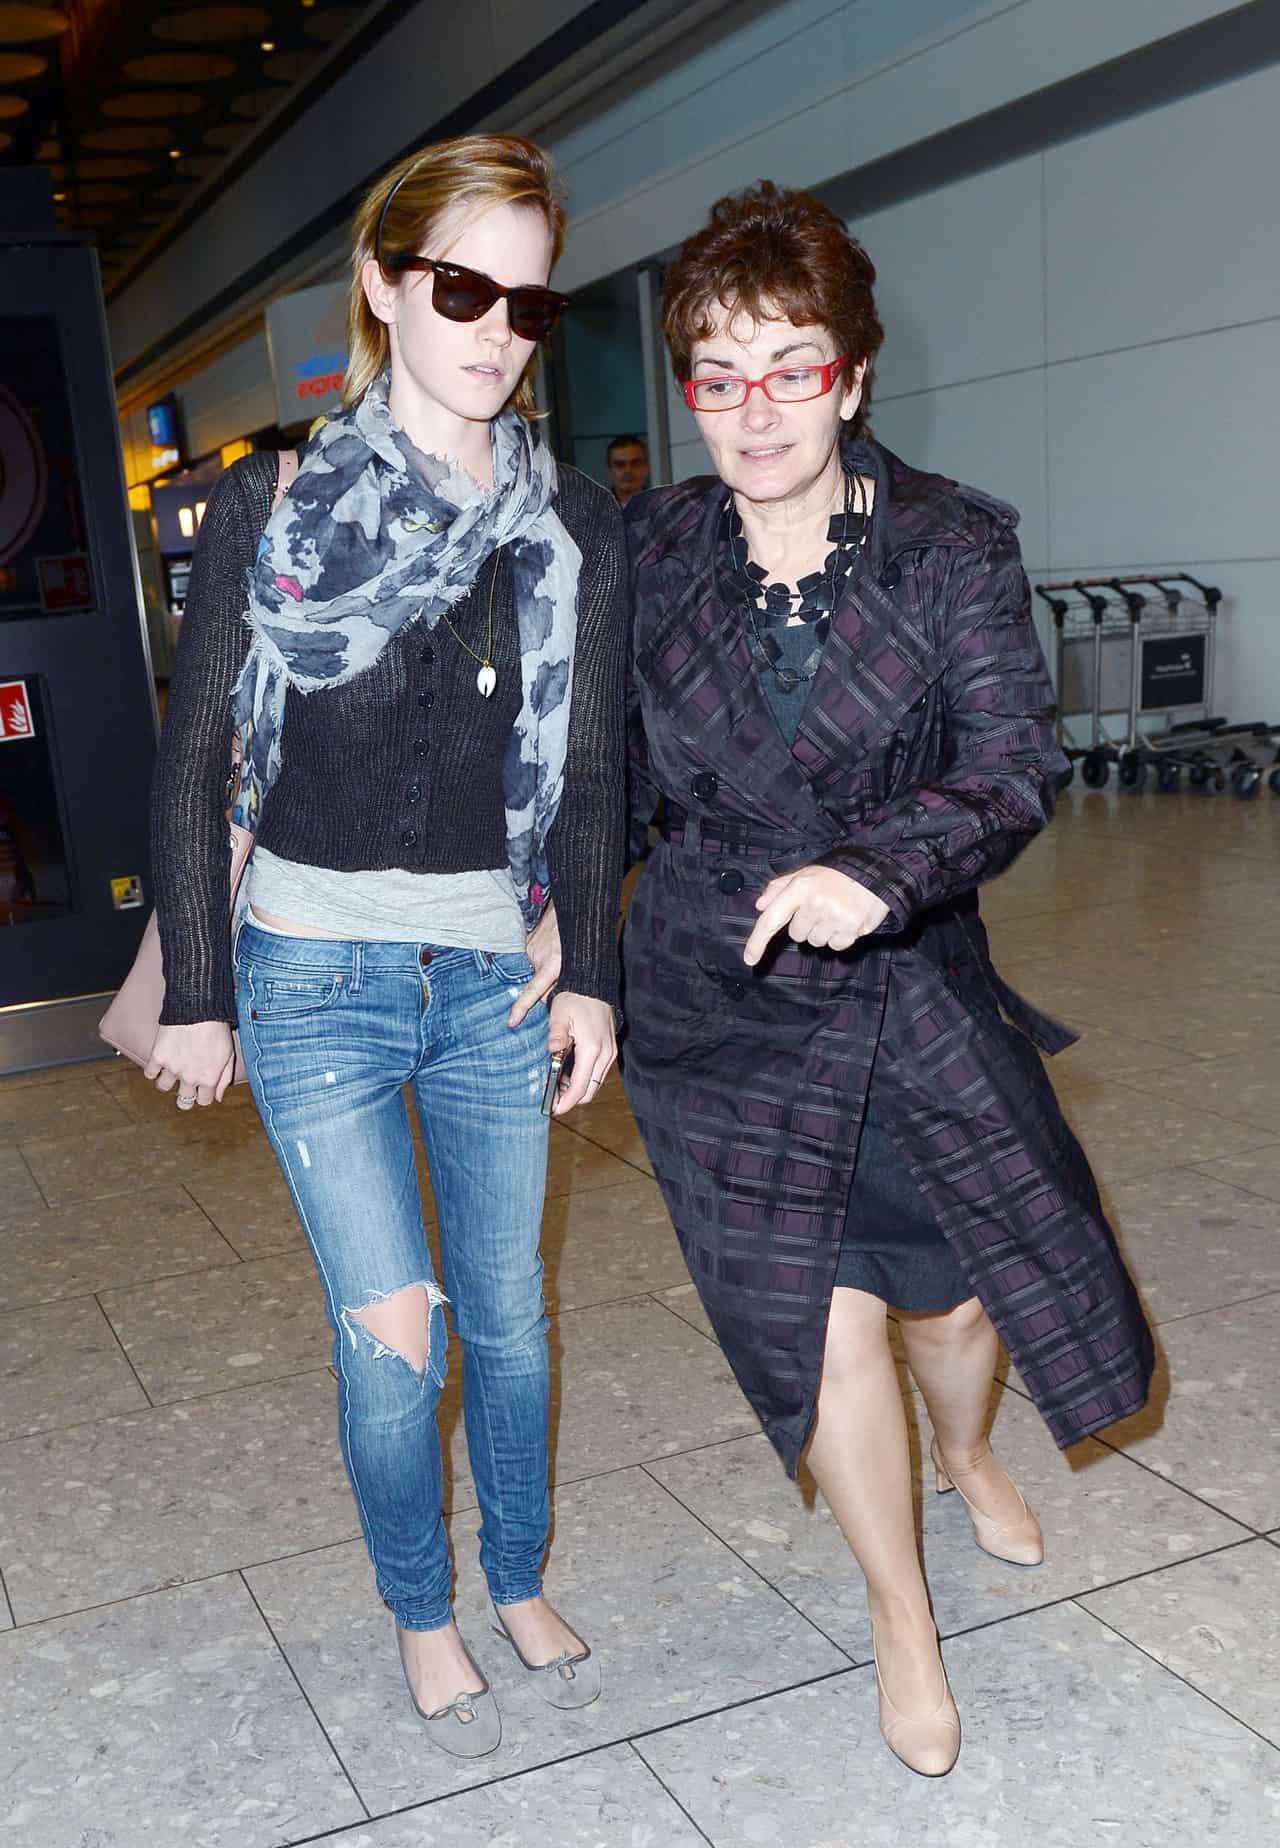 Emma Watson Nails the Chic Travel Look in a Black Sweater and Skinny Jeans